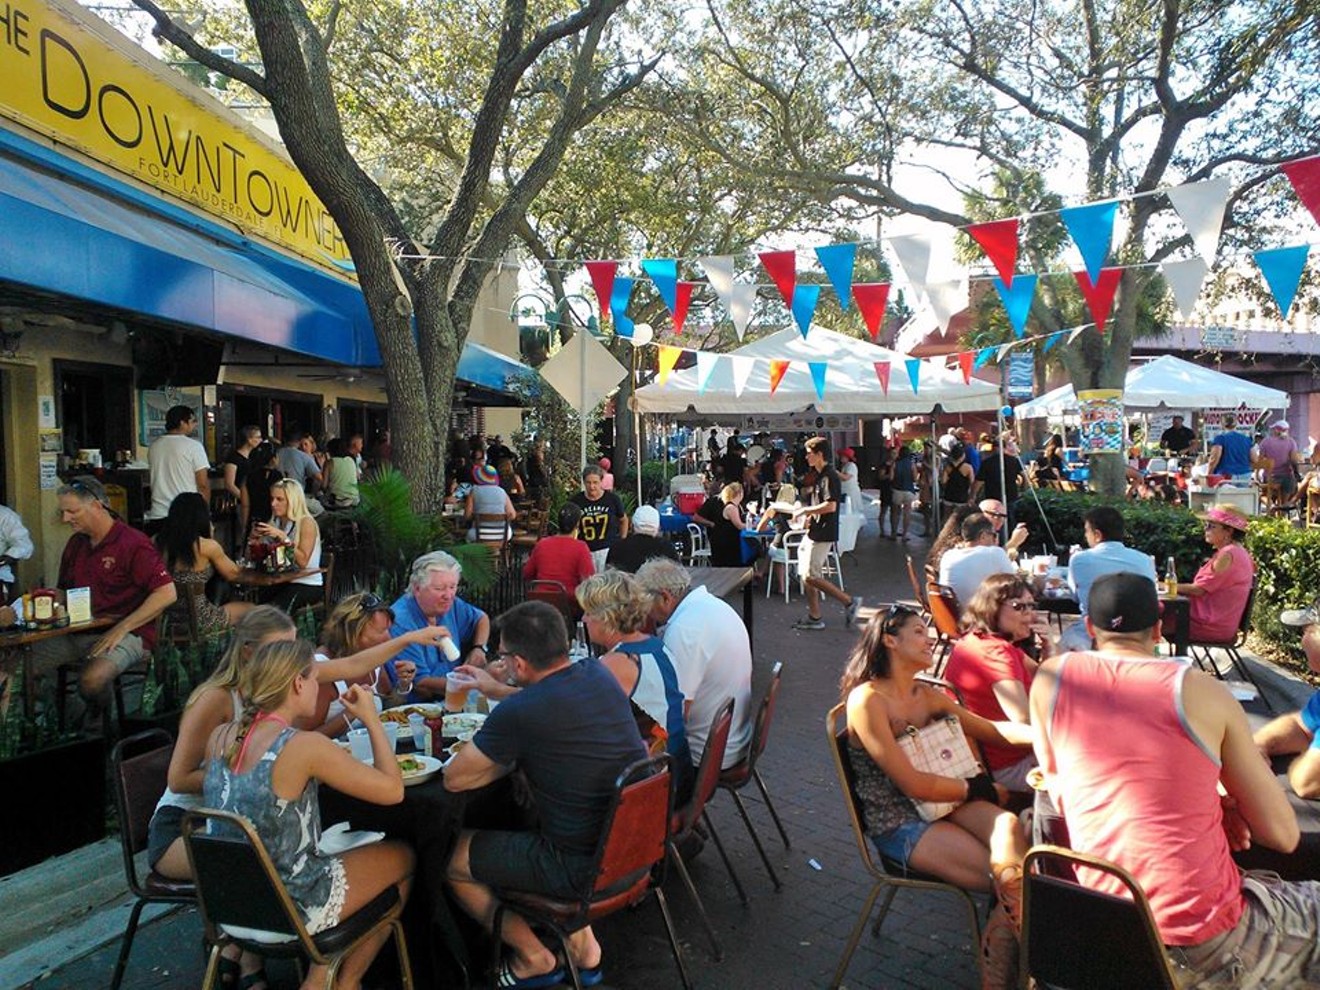 After a successful first year, the DownTowner's Crabfest returns this Saturday.